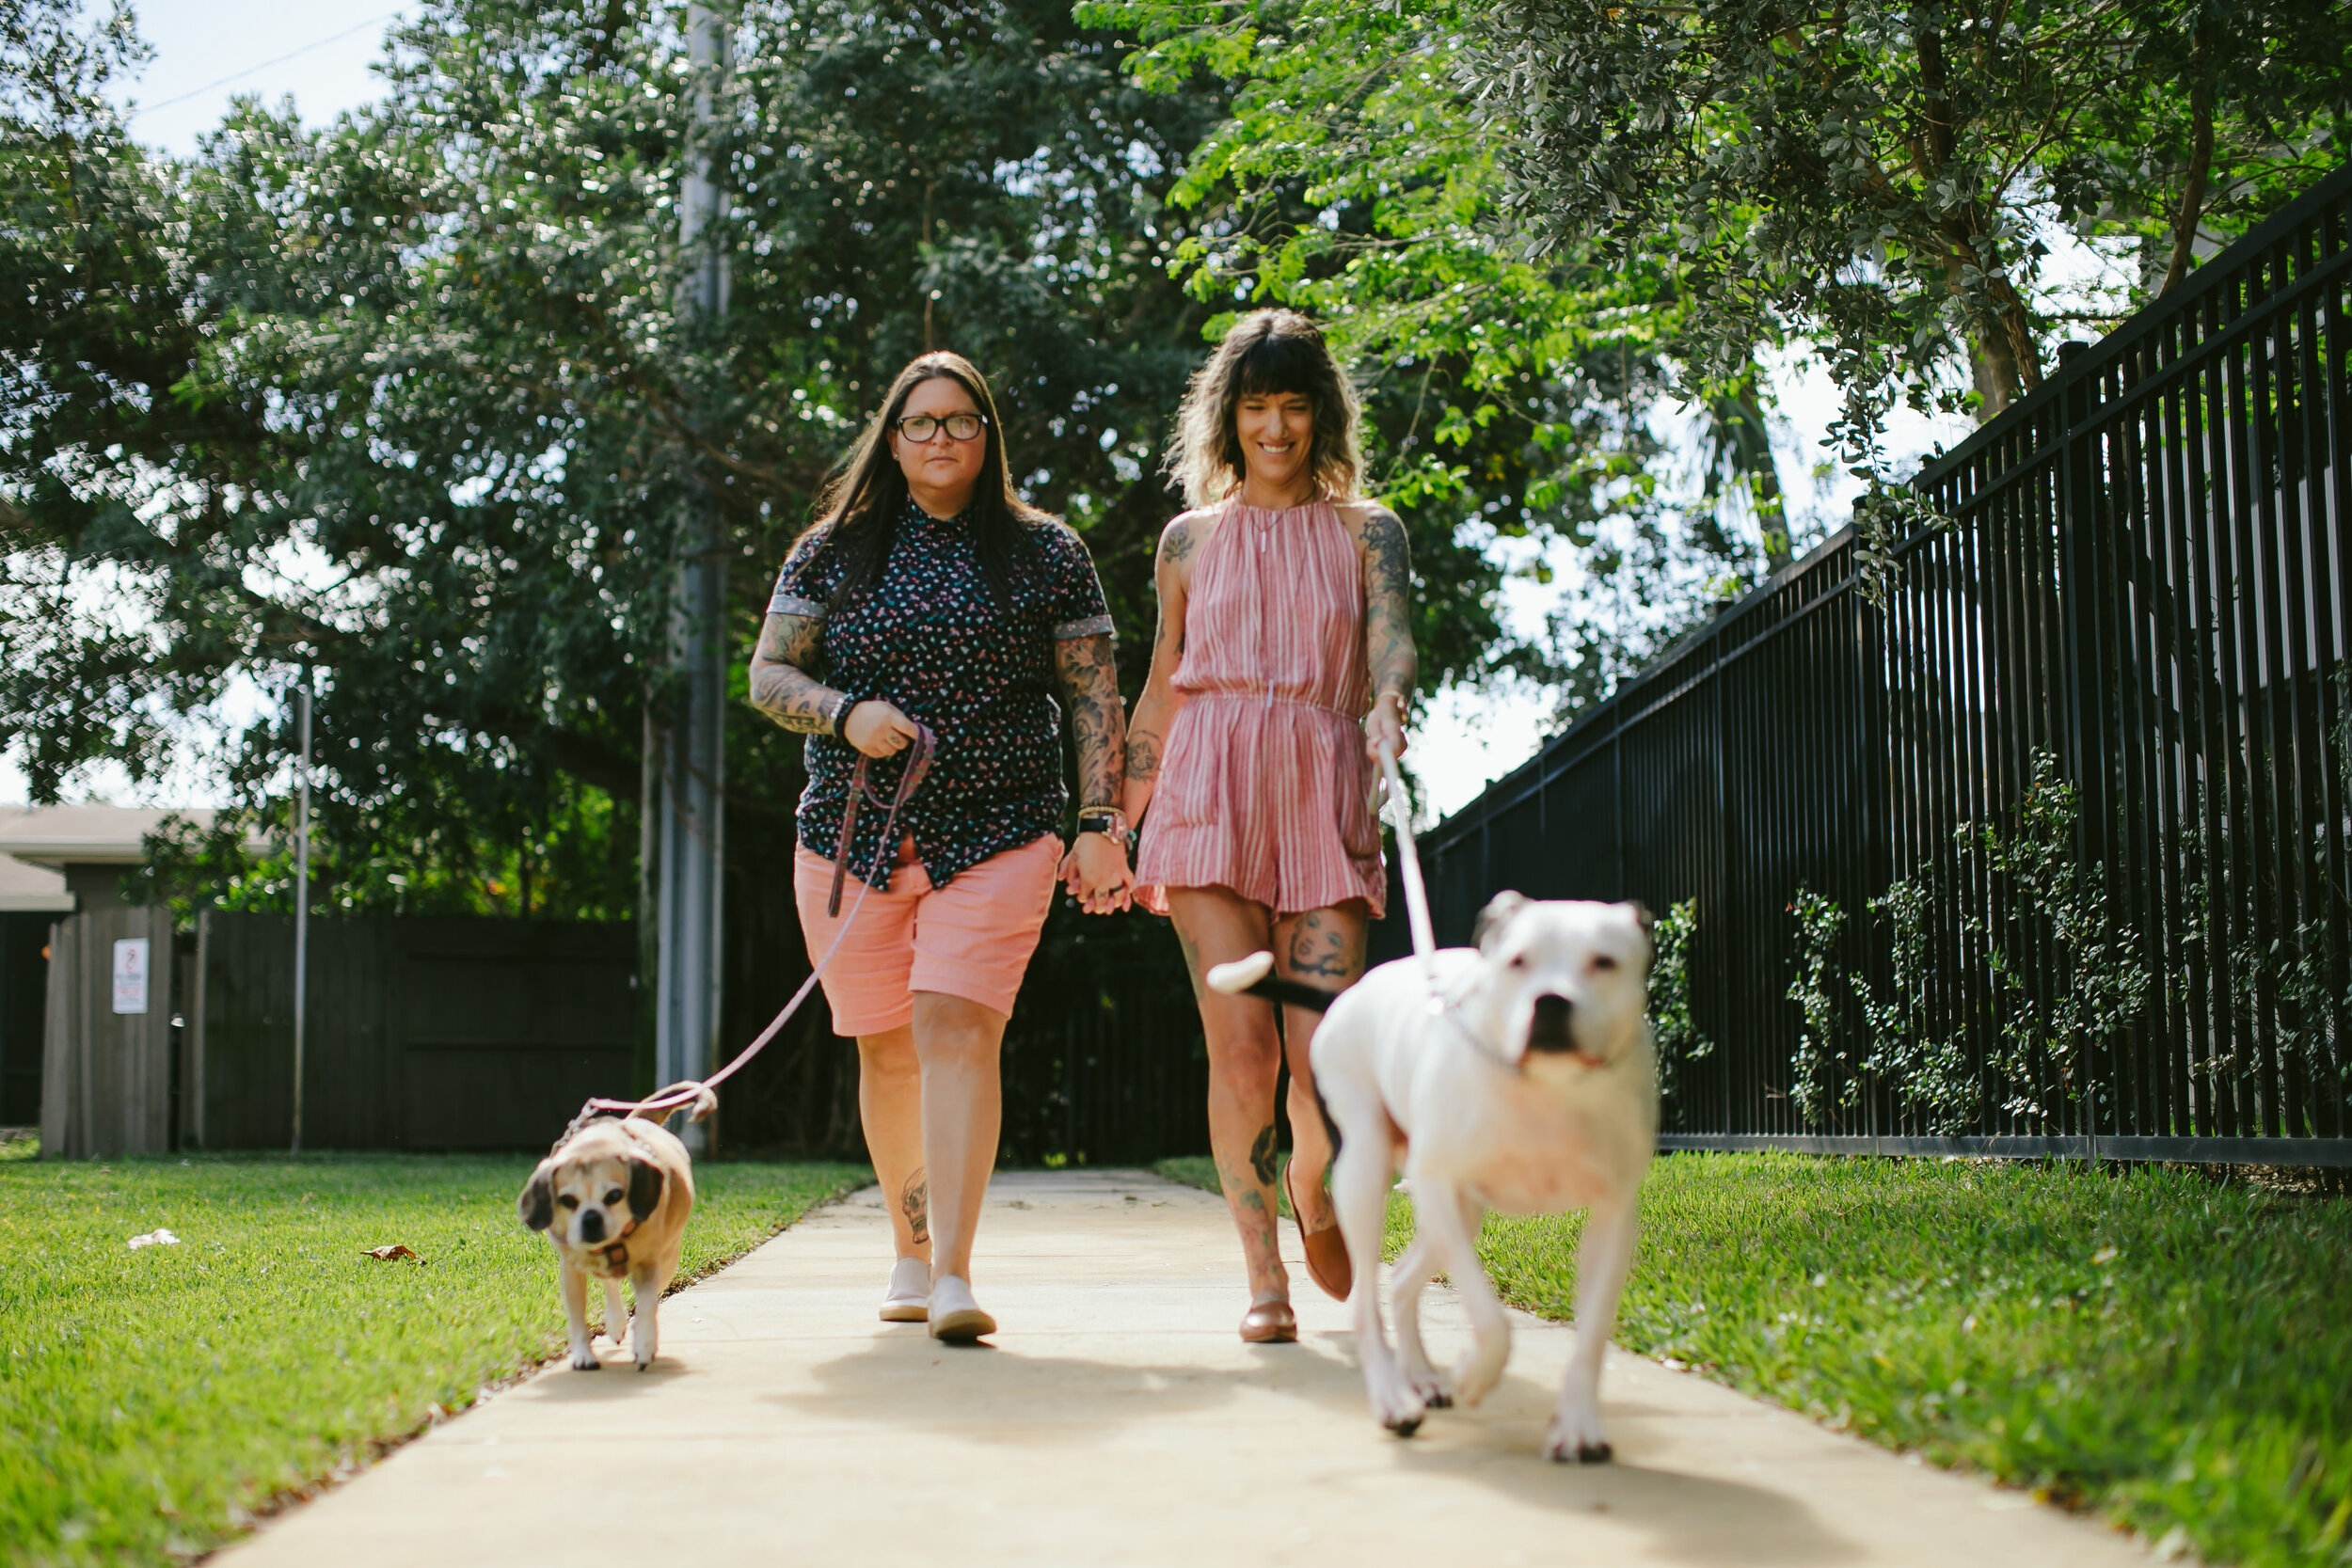 Walking-the-dogs-Wilton-Manors-Engagement-Session-25.jpg